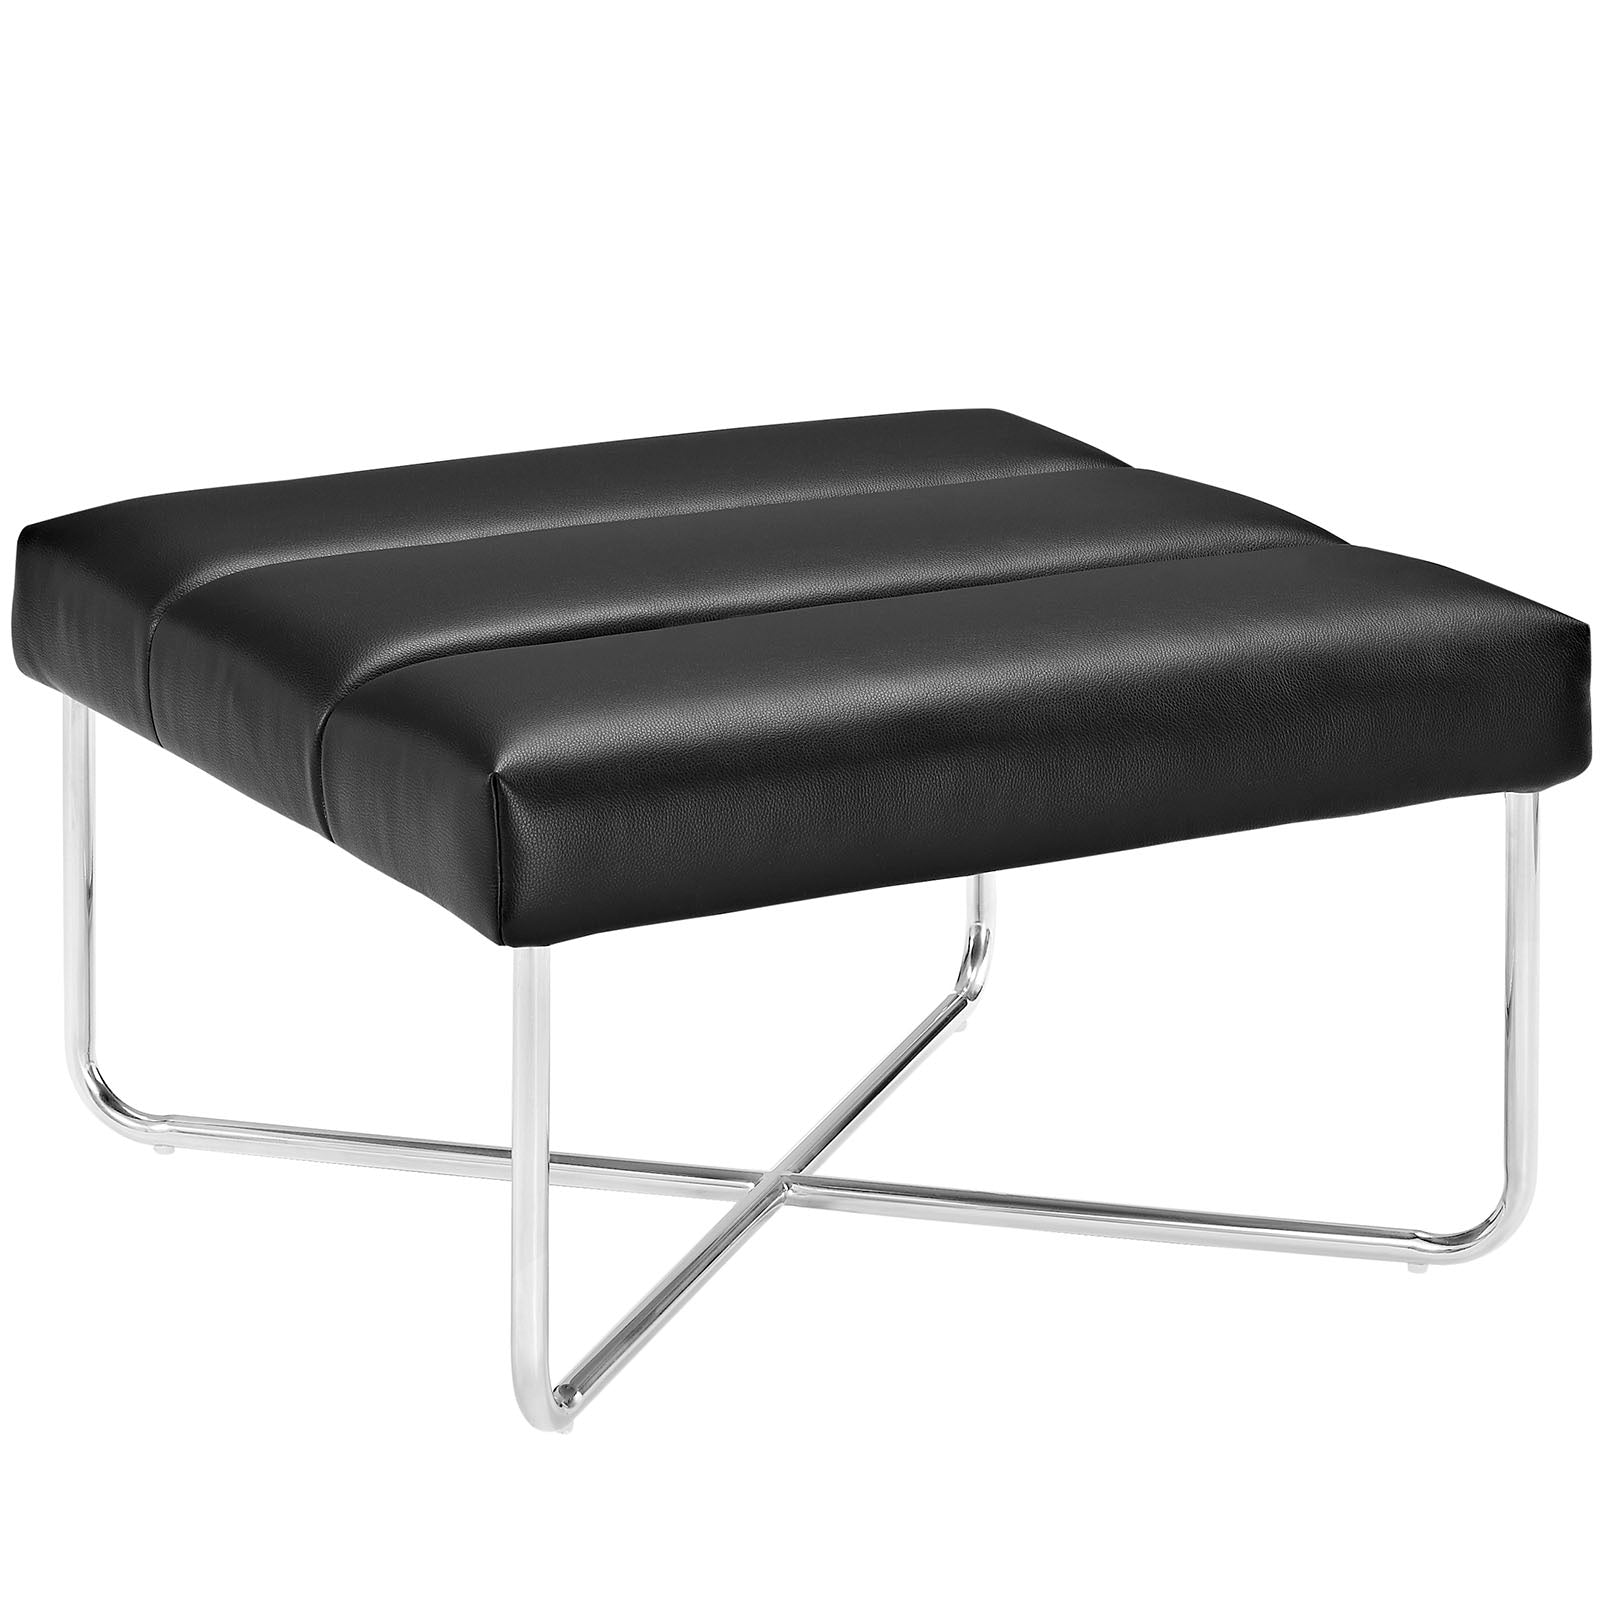 Modern Glam Black Tufted and Silver Steel Ottoman- Square Reach Upholstered Ottoman Coffee Table In Black With Footcaps